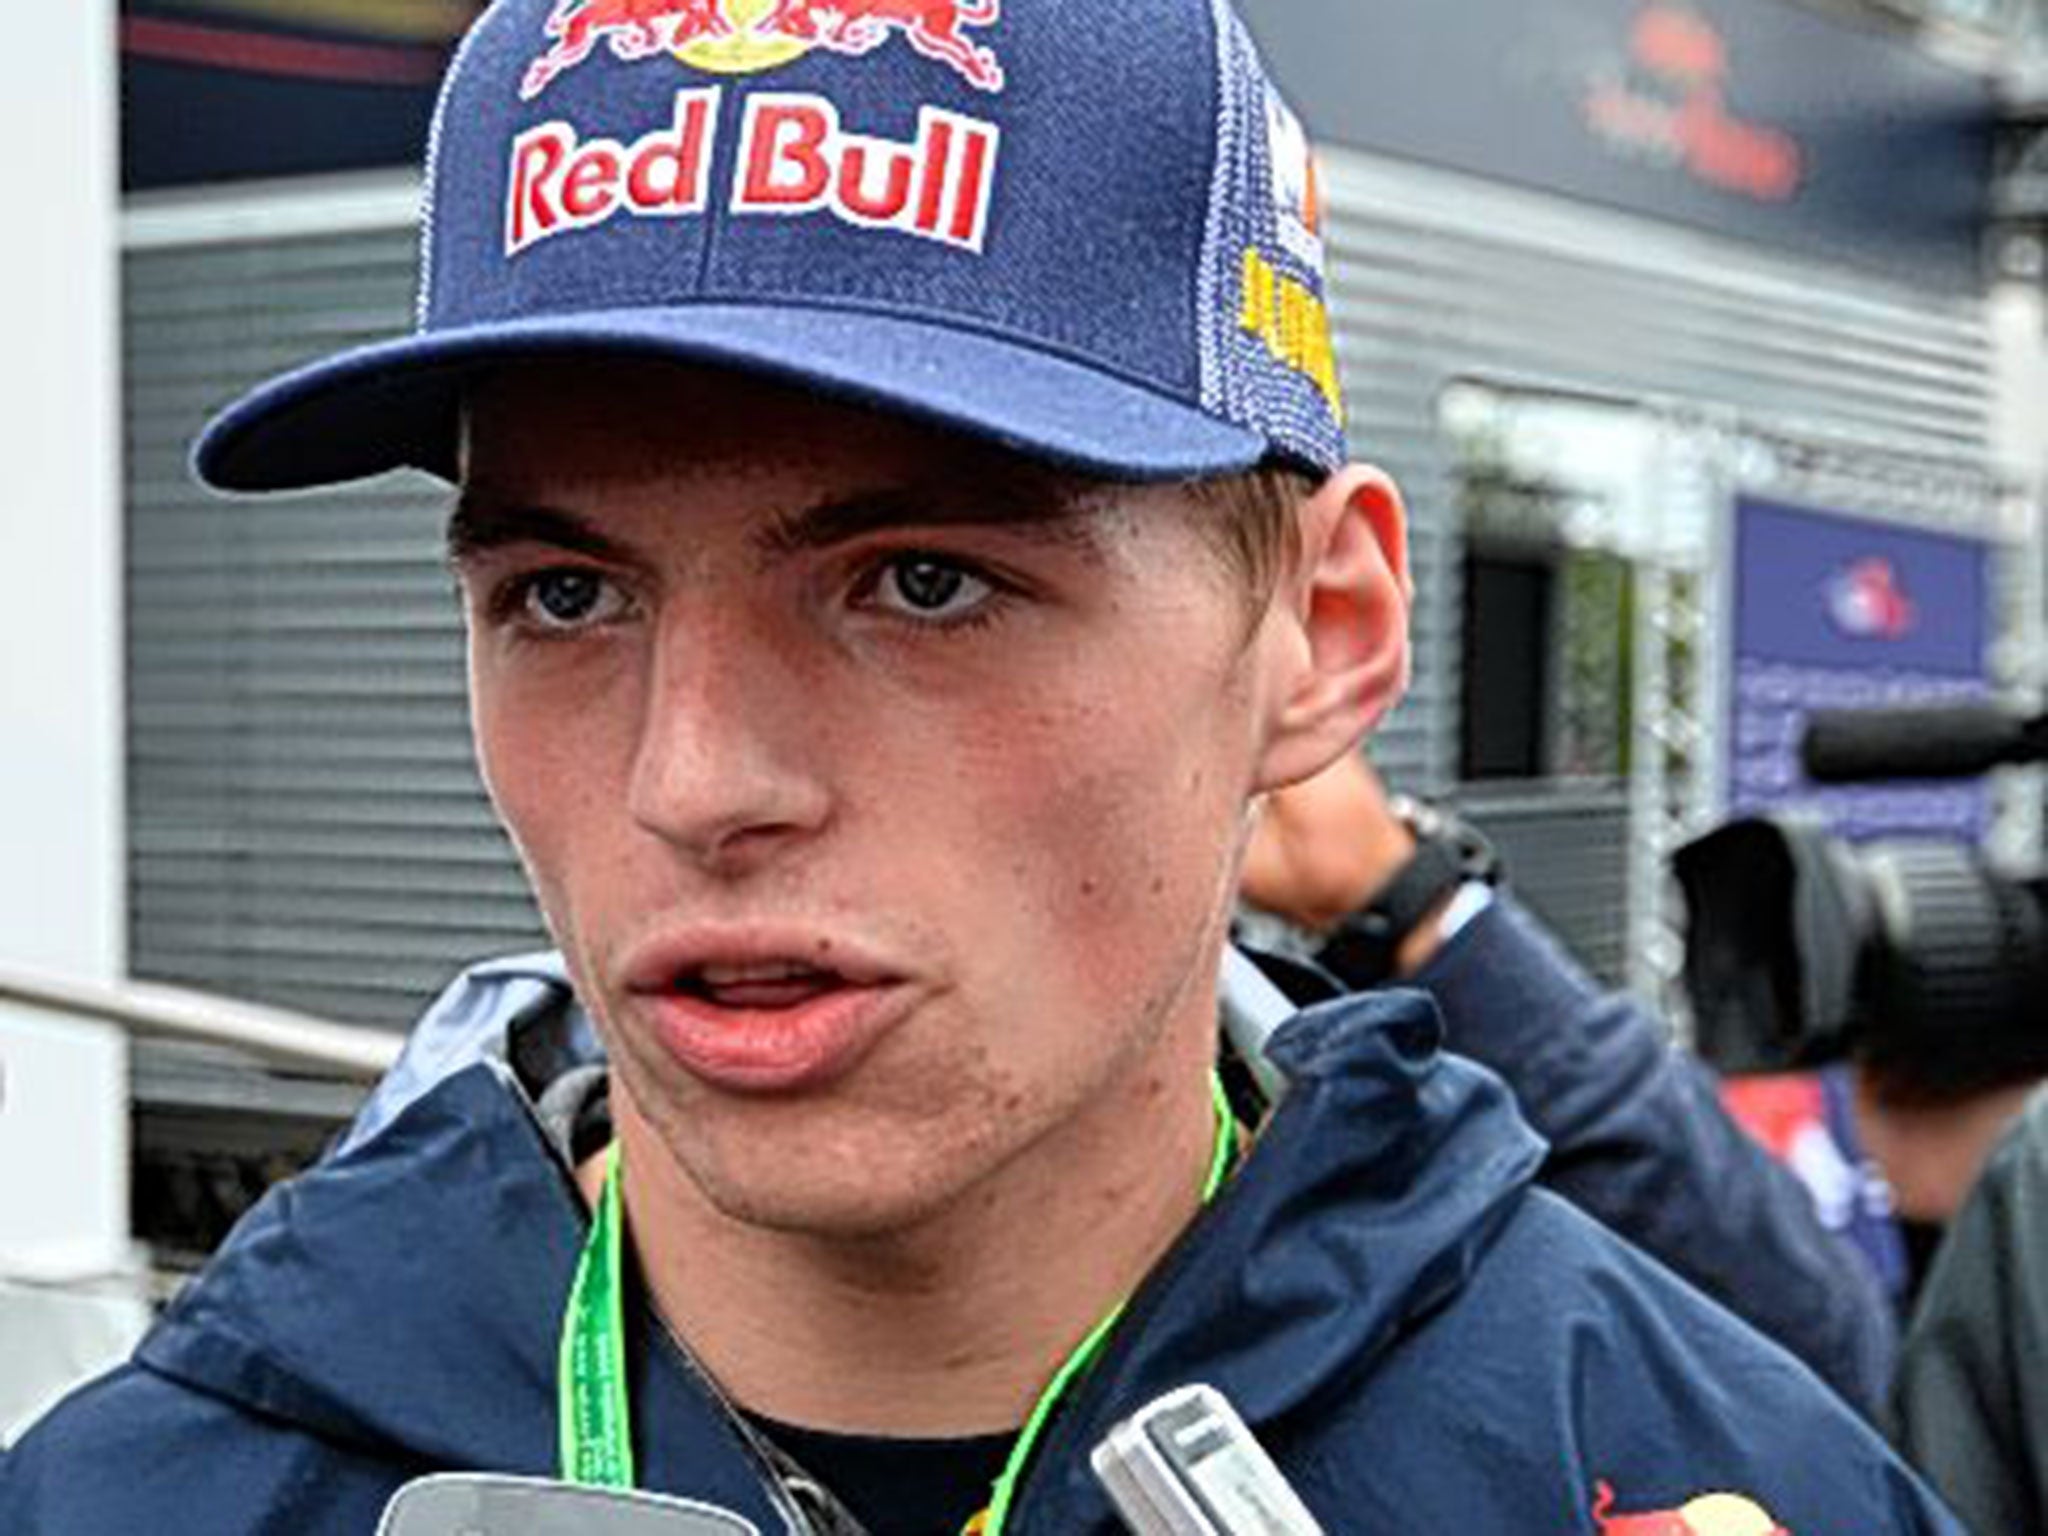 Dutch racer Max Verstappen is unfazed about becoming F1’s youngest driver in 2015